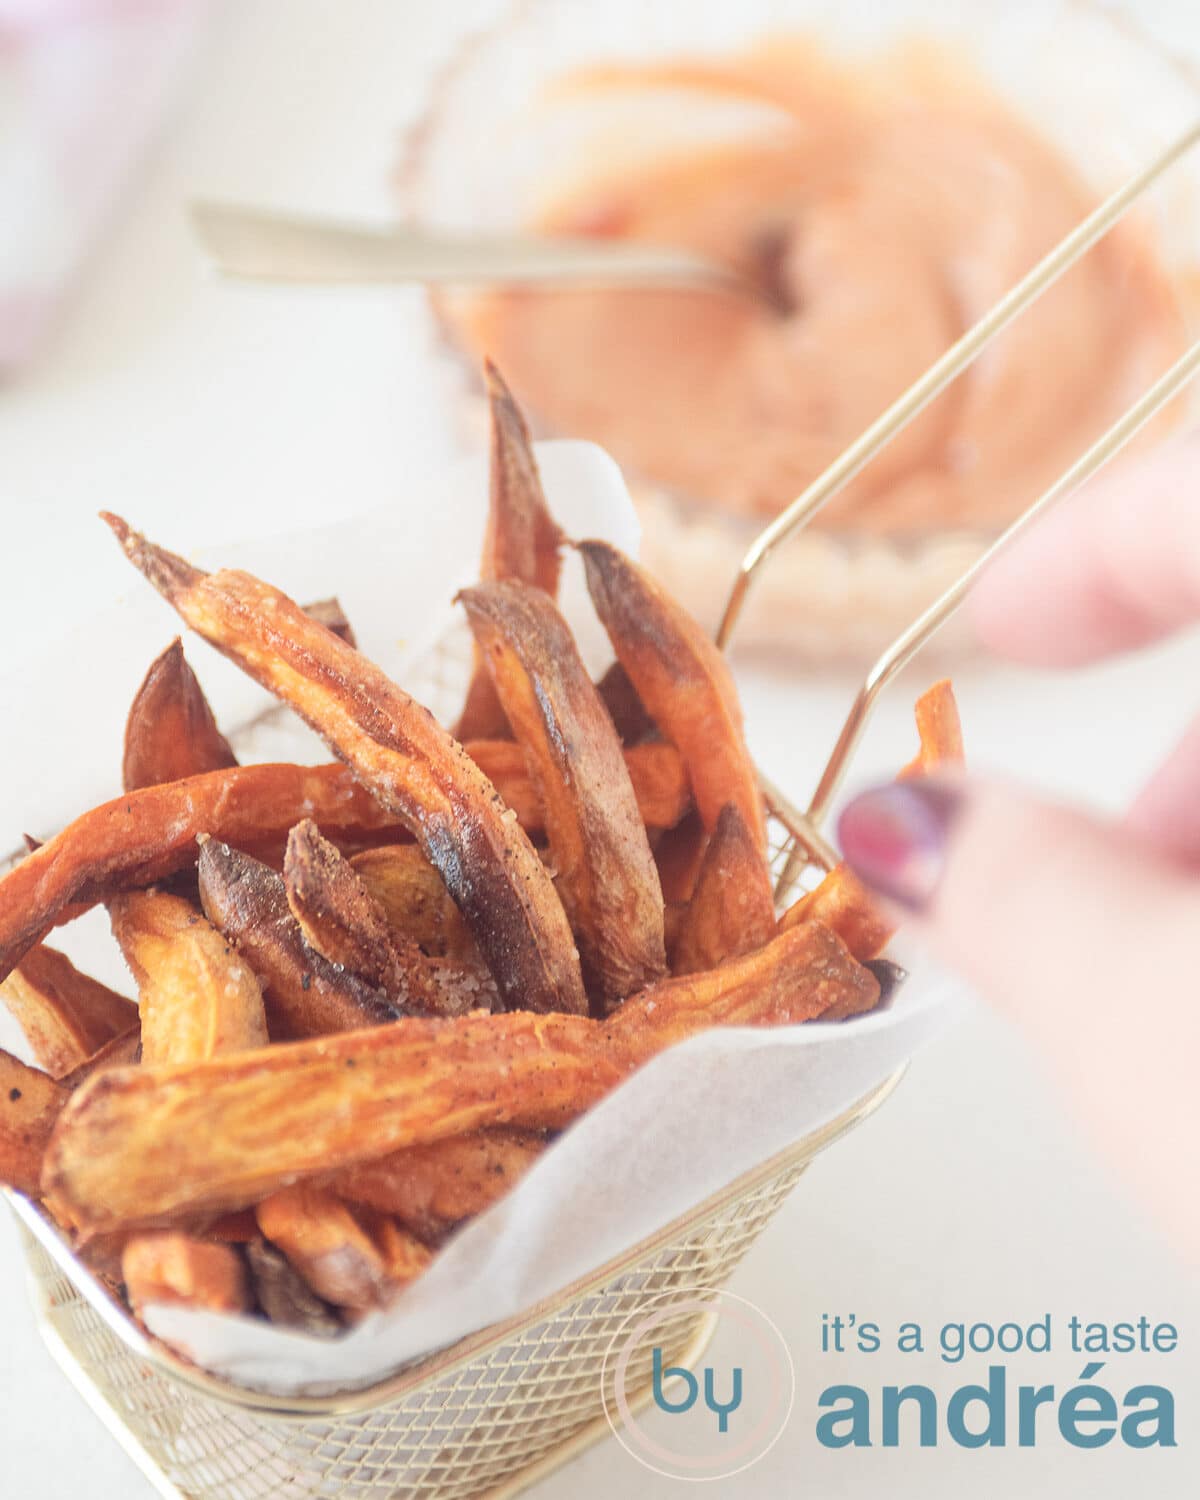 A hand taking a sweet potato fries from a golden chip tray with baking paper (which is filled with fries) in the background a dipping sauce